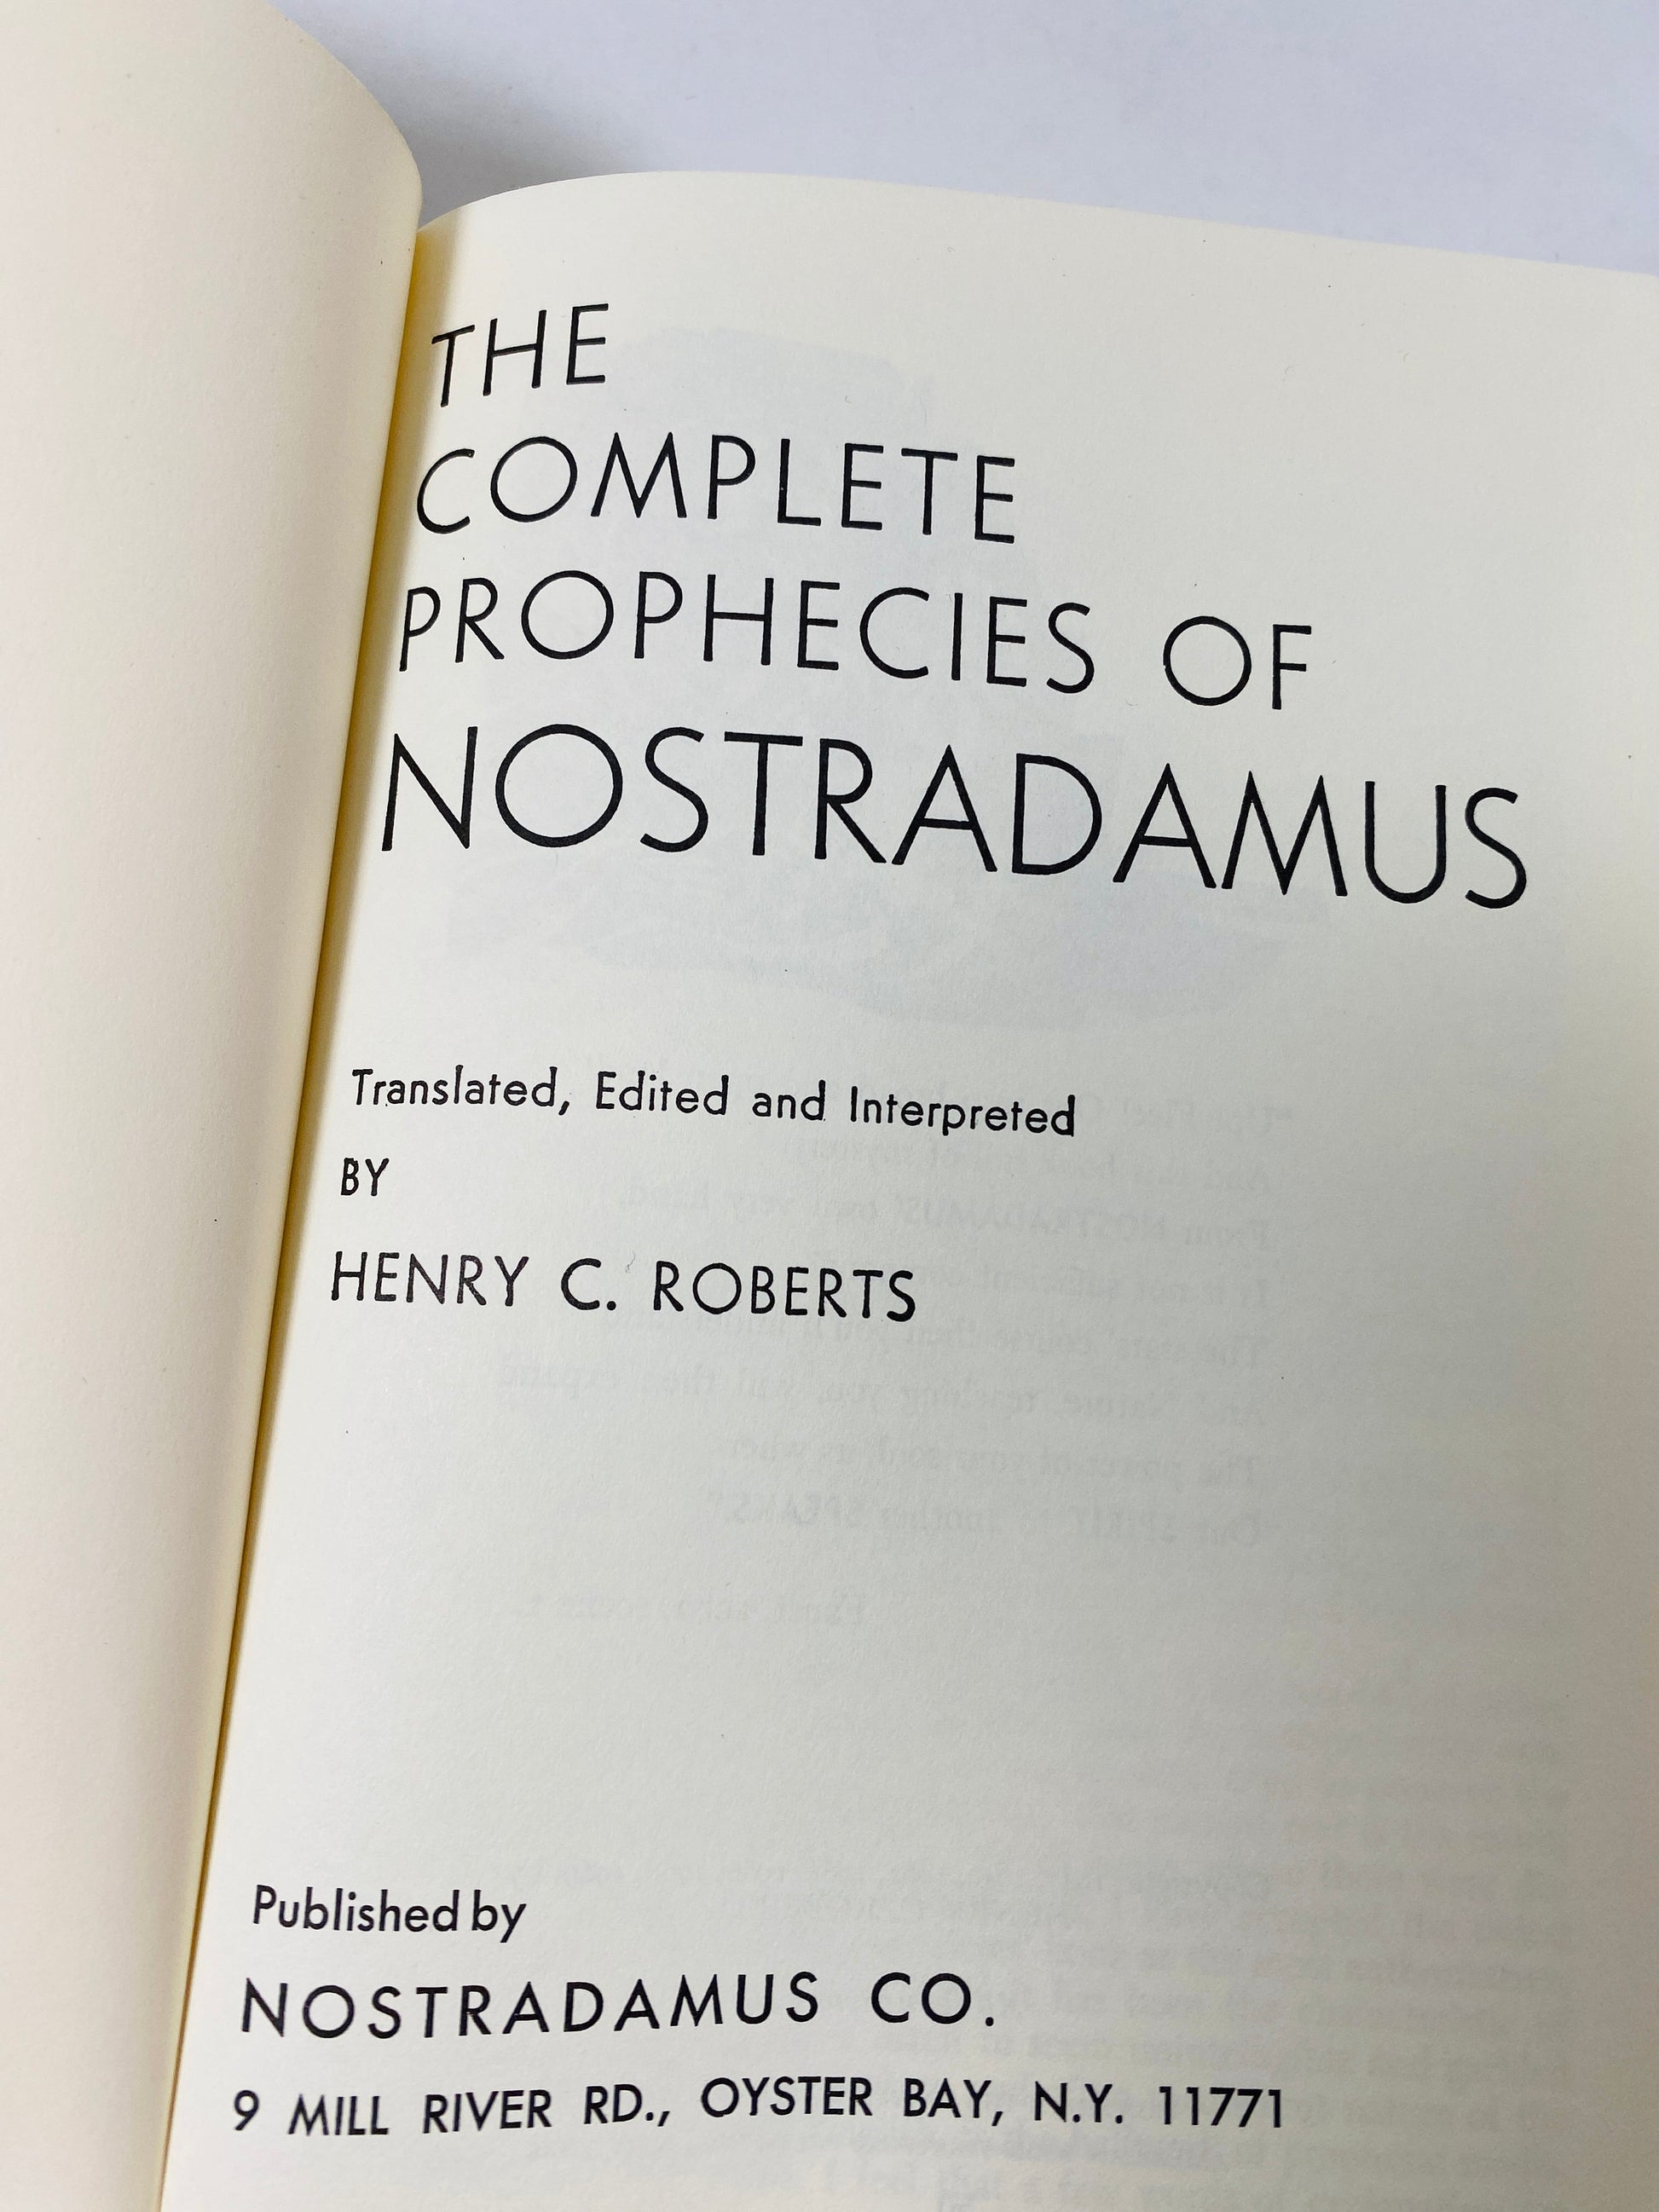 Nostradamus Complete Prophecies] Vintage unabridged book circa 1969 complete with the original French verses published in 1568. Occult gift